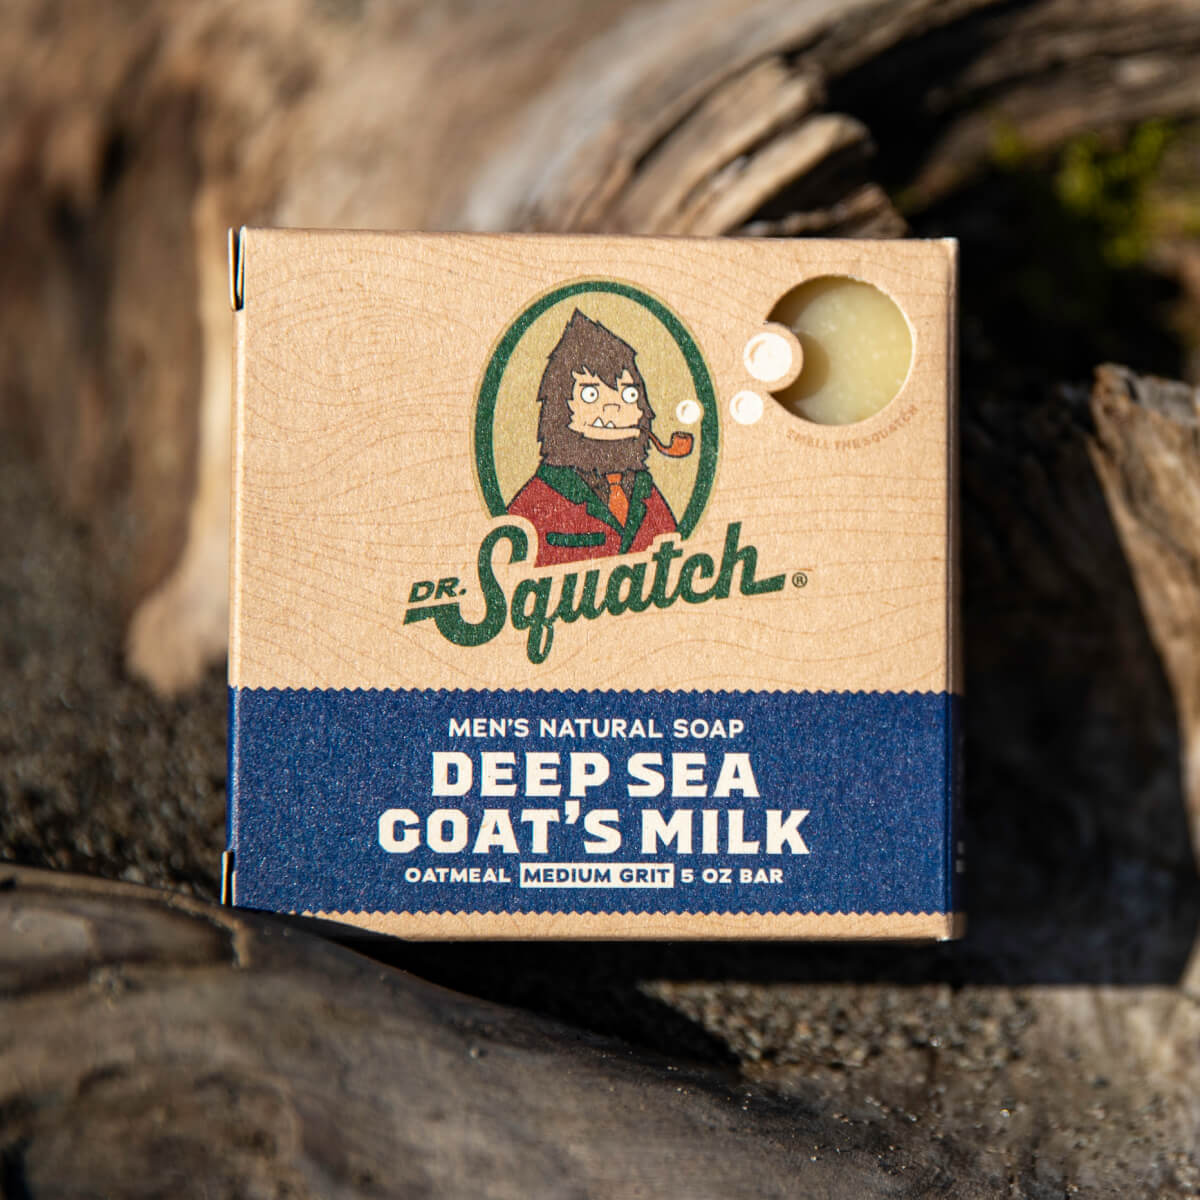 Dr. Squatch Soap Gripper – The Glossy Goat